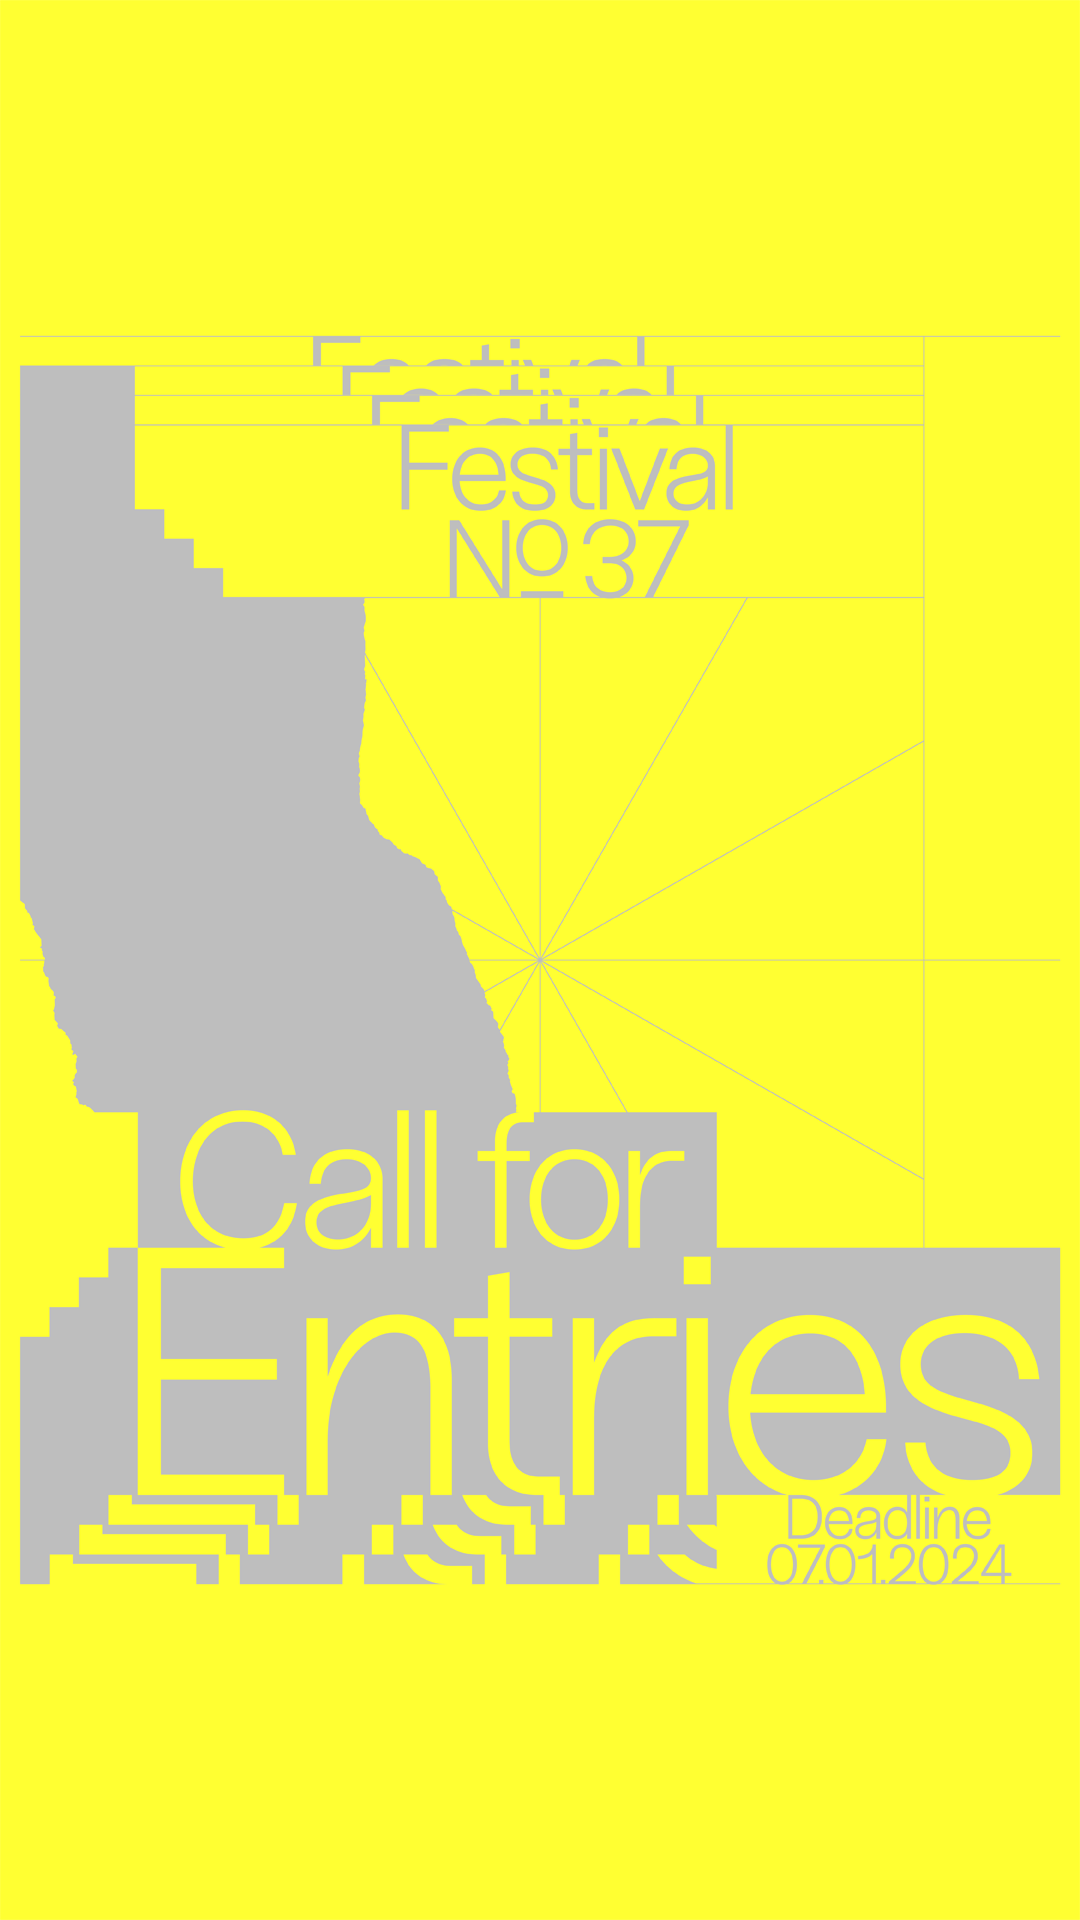 Biennale Cinema 2023  Registration is now open for films and for  accreditation requests